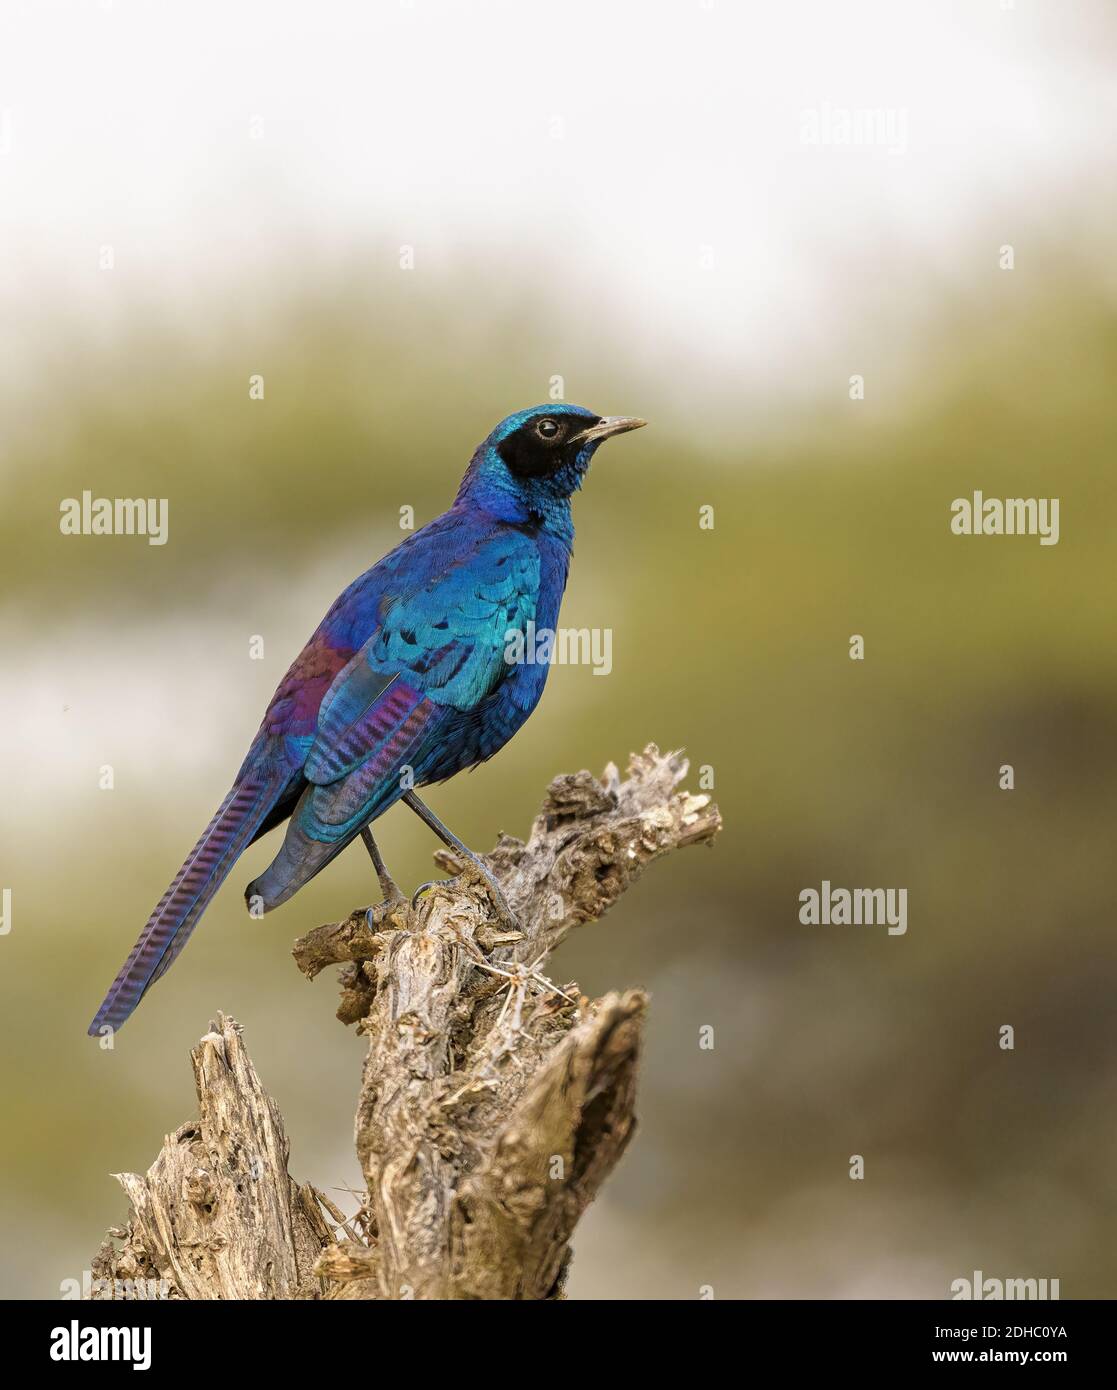 Burchell’s Starling perched on tree stump Stock Photo